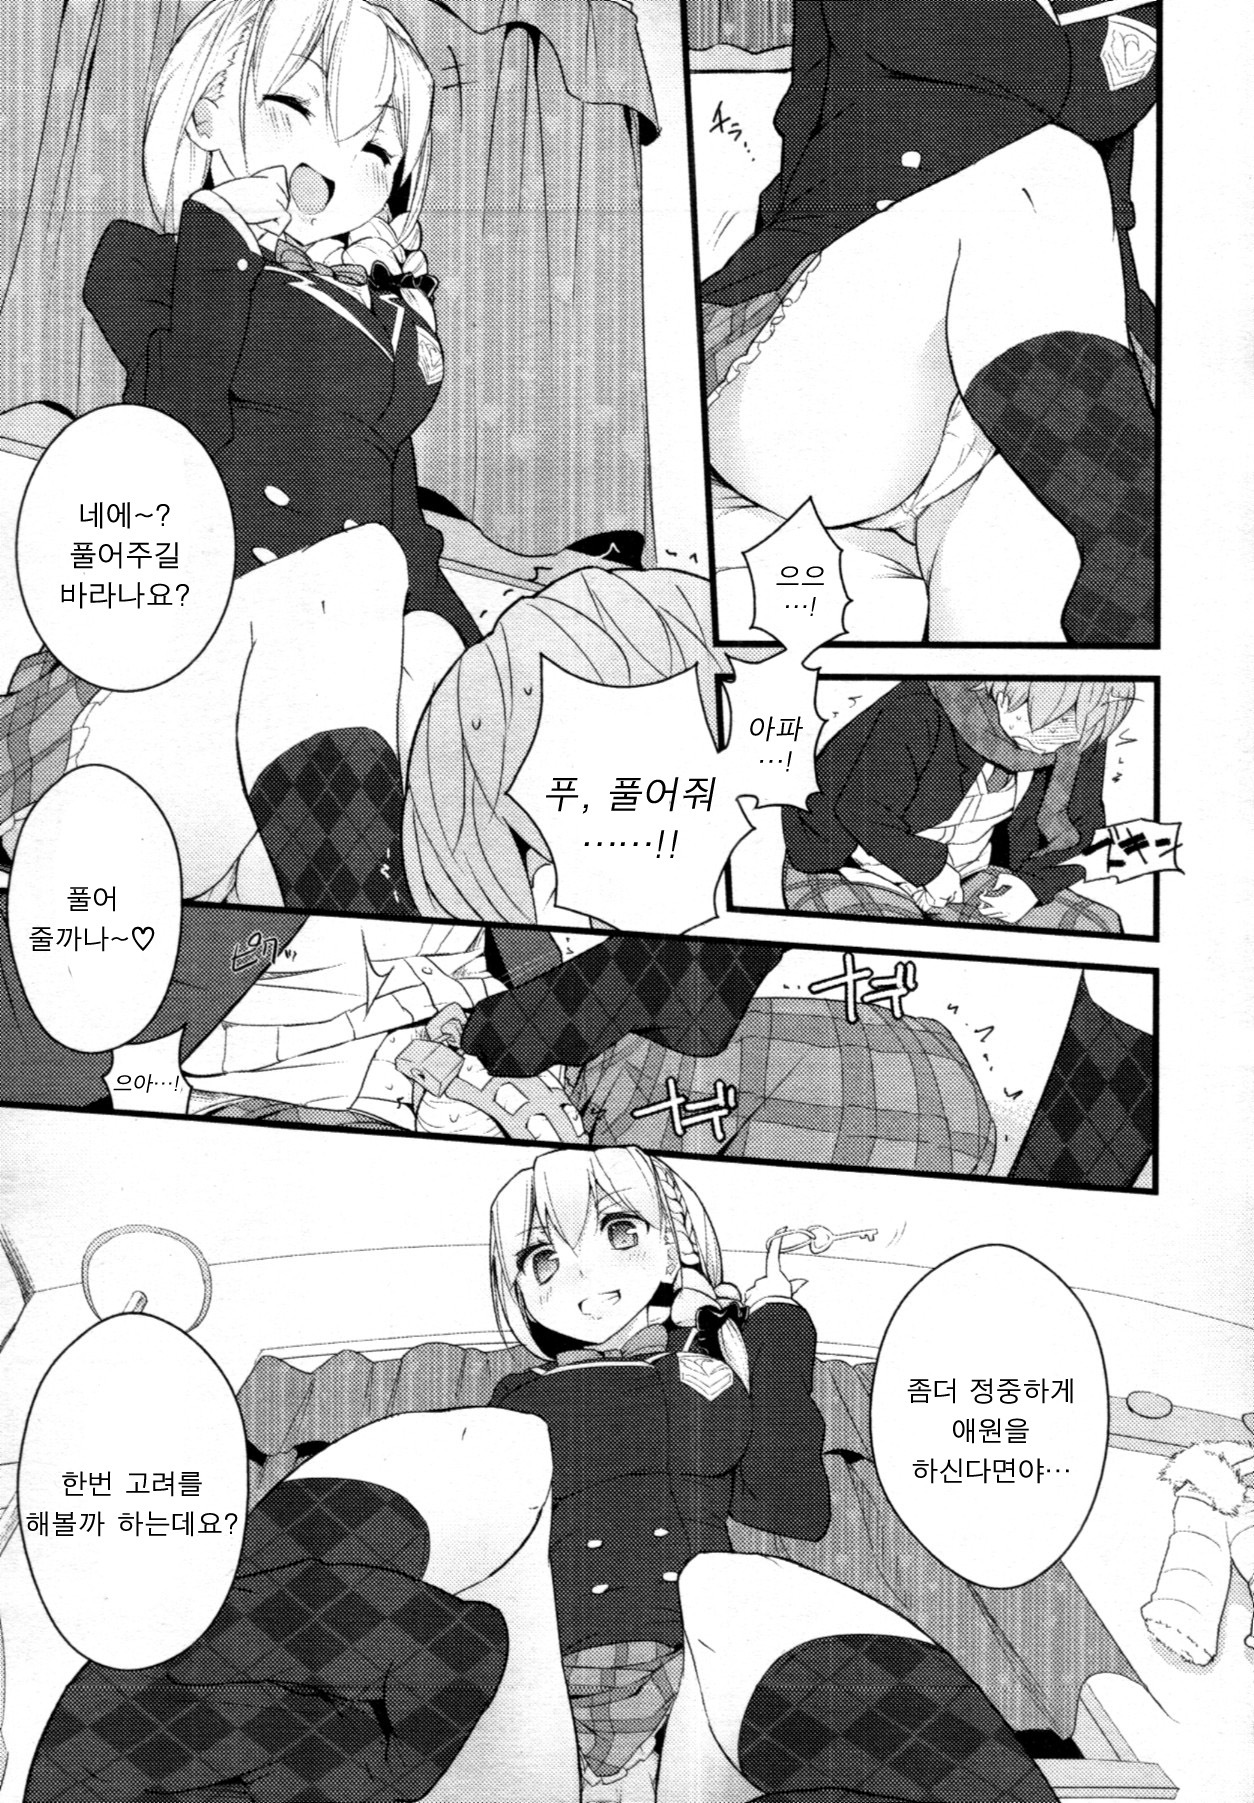 [Mame] Sex a Heel (COMIC Tenma 2011-07) [Korean] [Lily] page 3 full